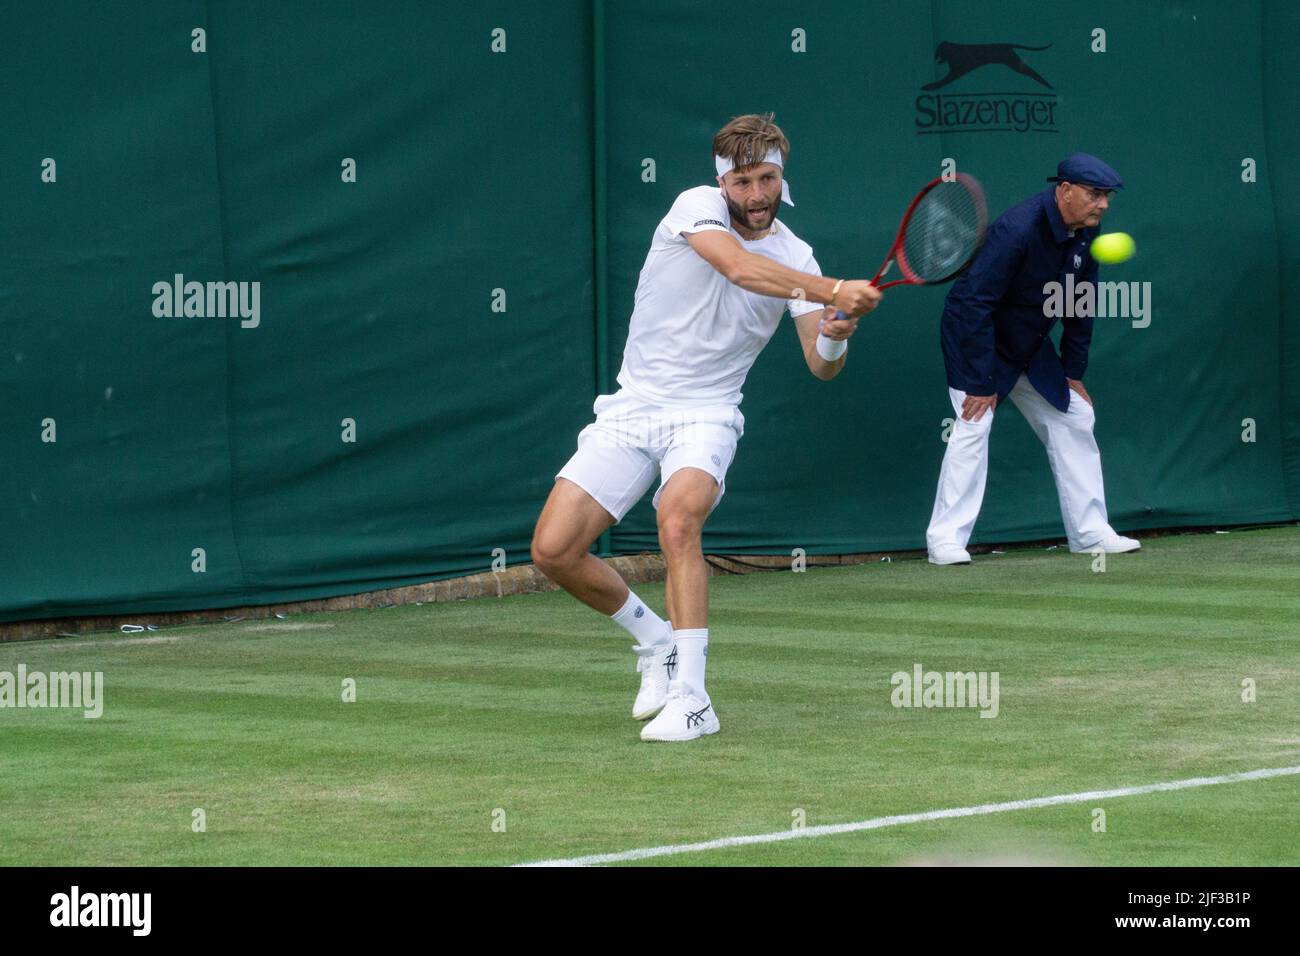 Wimbledon, UK, 28 June 2022: British tennis player Liam Broady in action on court 17 at the Wimbledon tennis championships. The Stockport-born 28 year old beat Lukas Klein in 5 sets in the first round of the tournament. Anna Watson/Alamy Live News Stock Photo